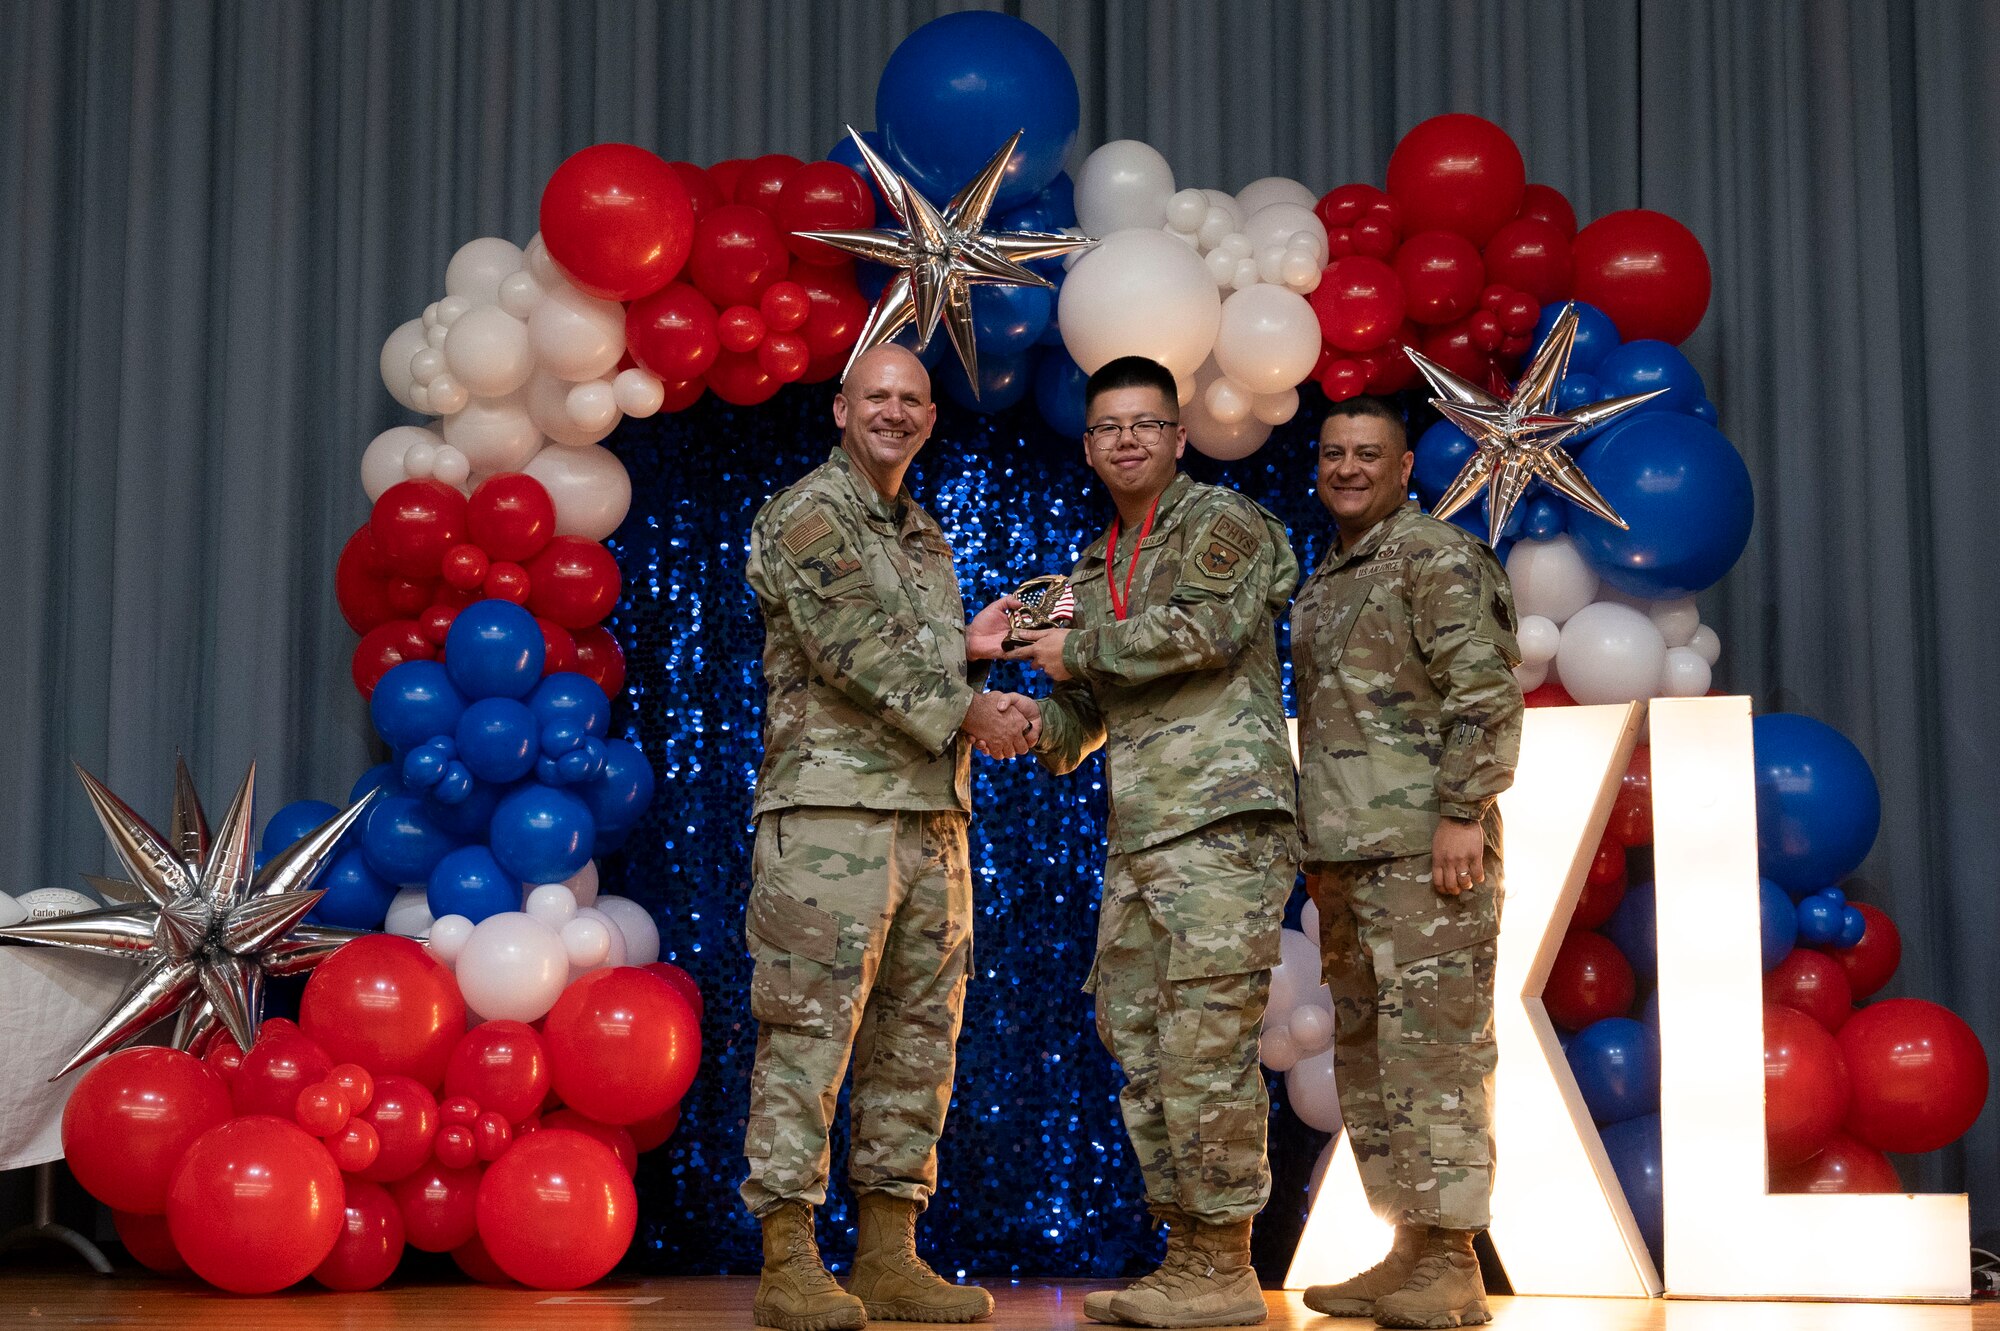 U.S. Air Force Col. Kevin Davidson, 47th Flying Training Wing (FTW) commander, and Chief Master Sgt. Lester Largaespada, 47th FTW command chief, present Airman 1st Class Alexander Lee, 47th Operations Group, an award during the 2023 47th FTW Annual Awards Ceremony at Laughlin Air Force Base, Texas, Feb. 2, 2024. The annual awards recognized the top performers throughout the 47th Flying Training Wing during fiscal year 2023. (U.S. Air Force photo by Senior Airman Kailee Reynolds)